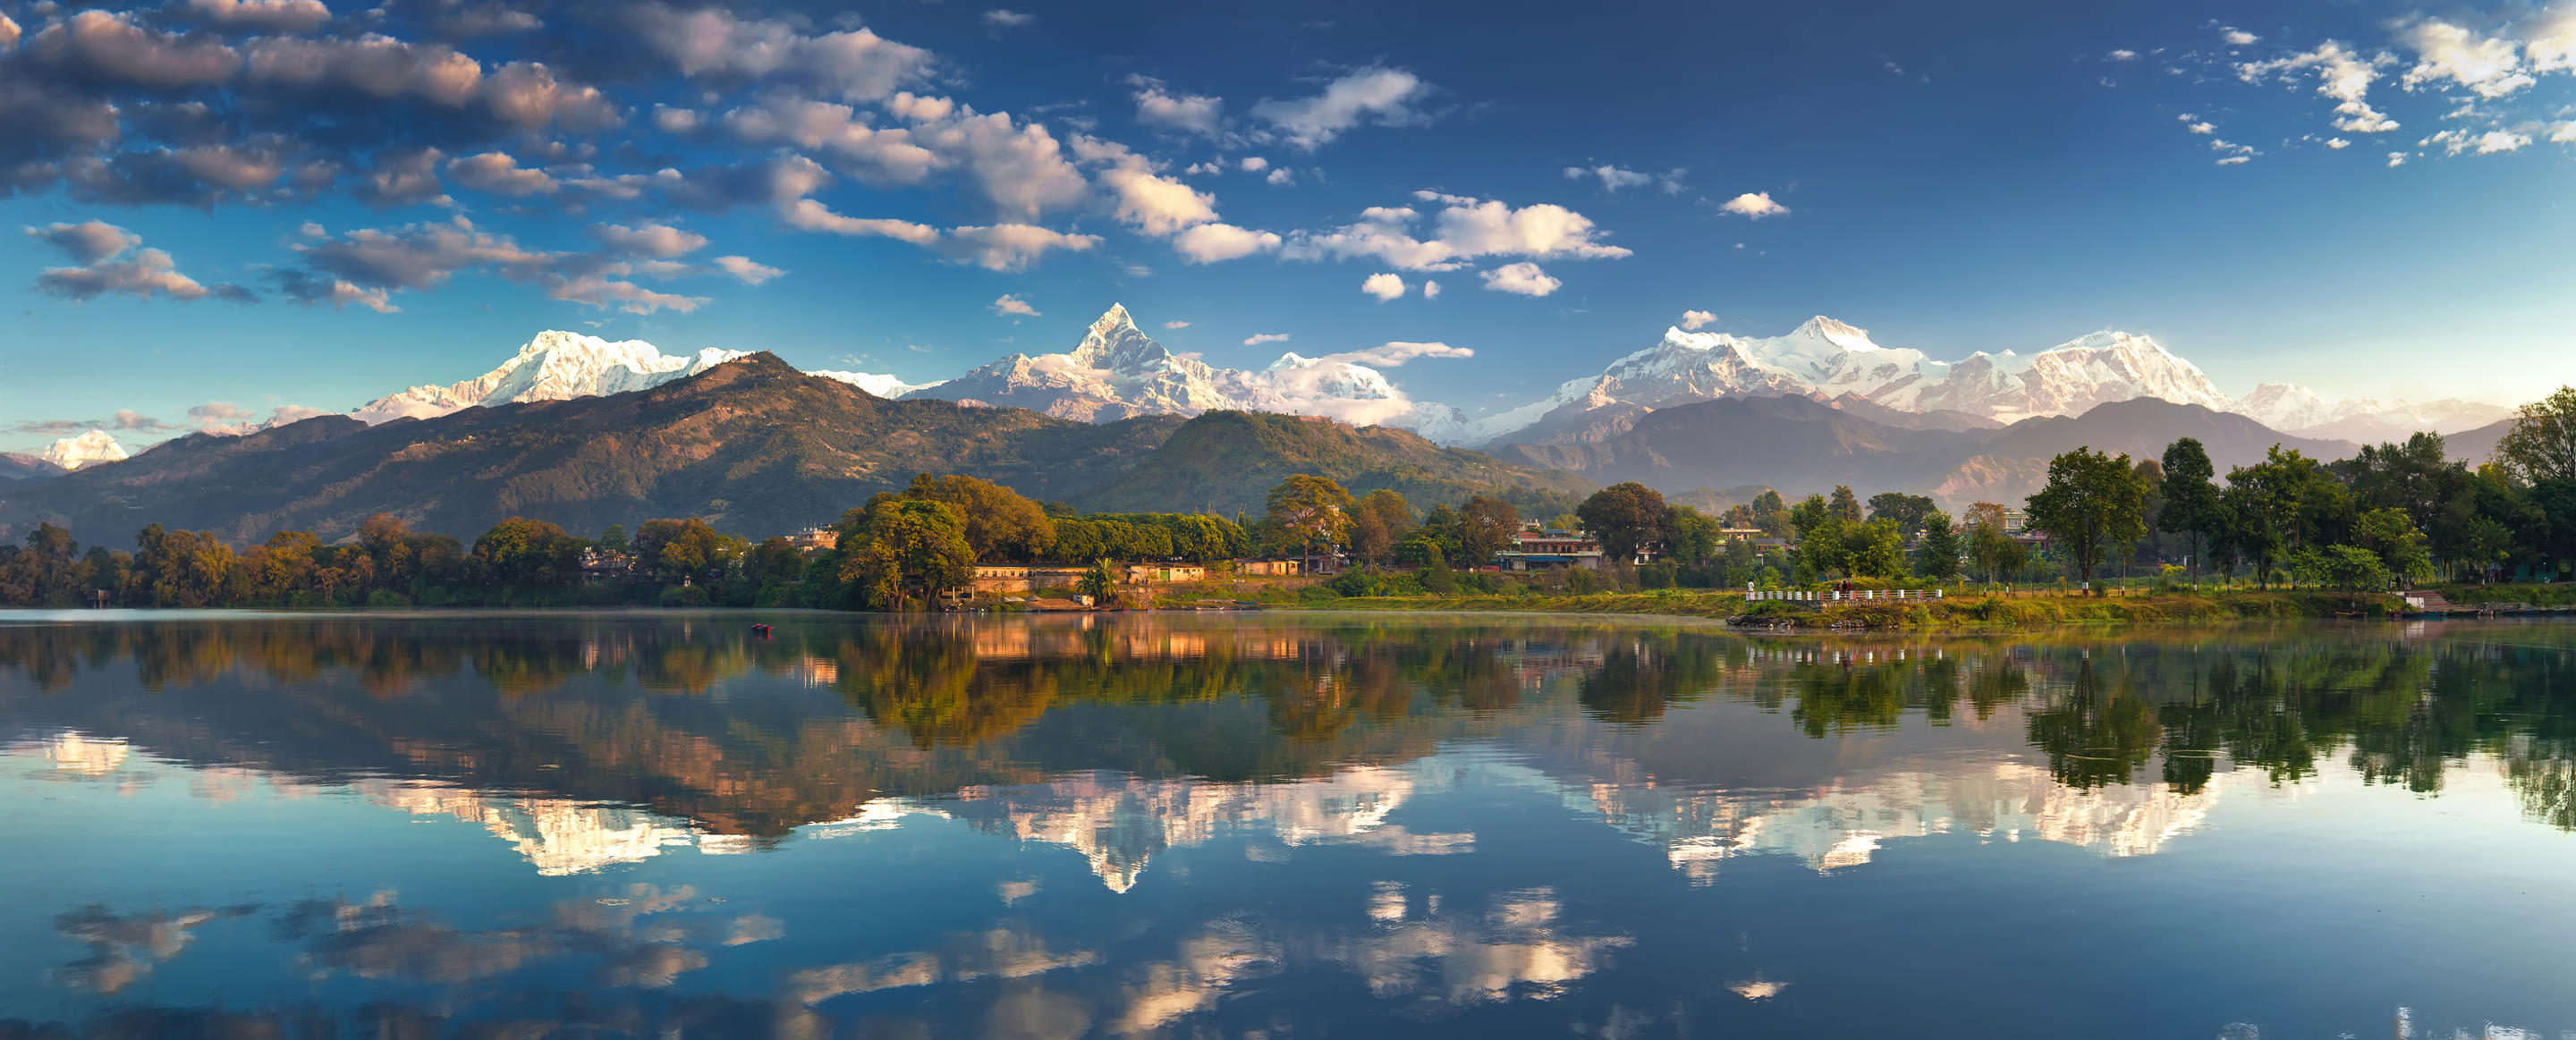 Best Events in Pokhara